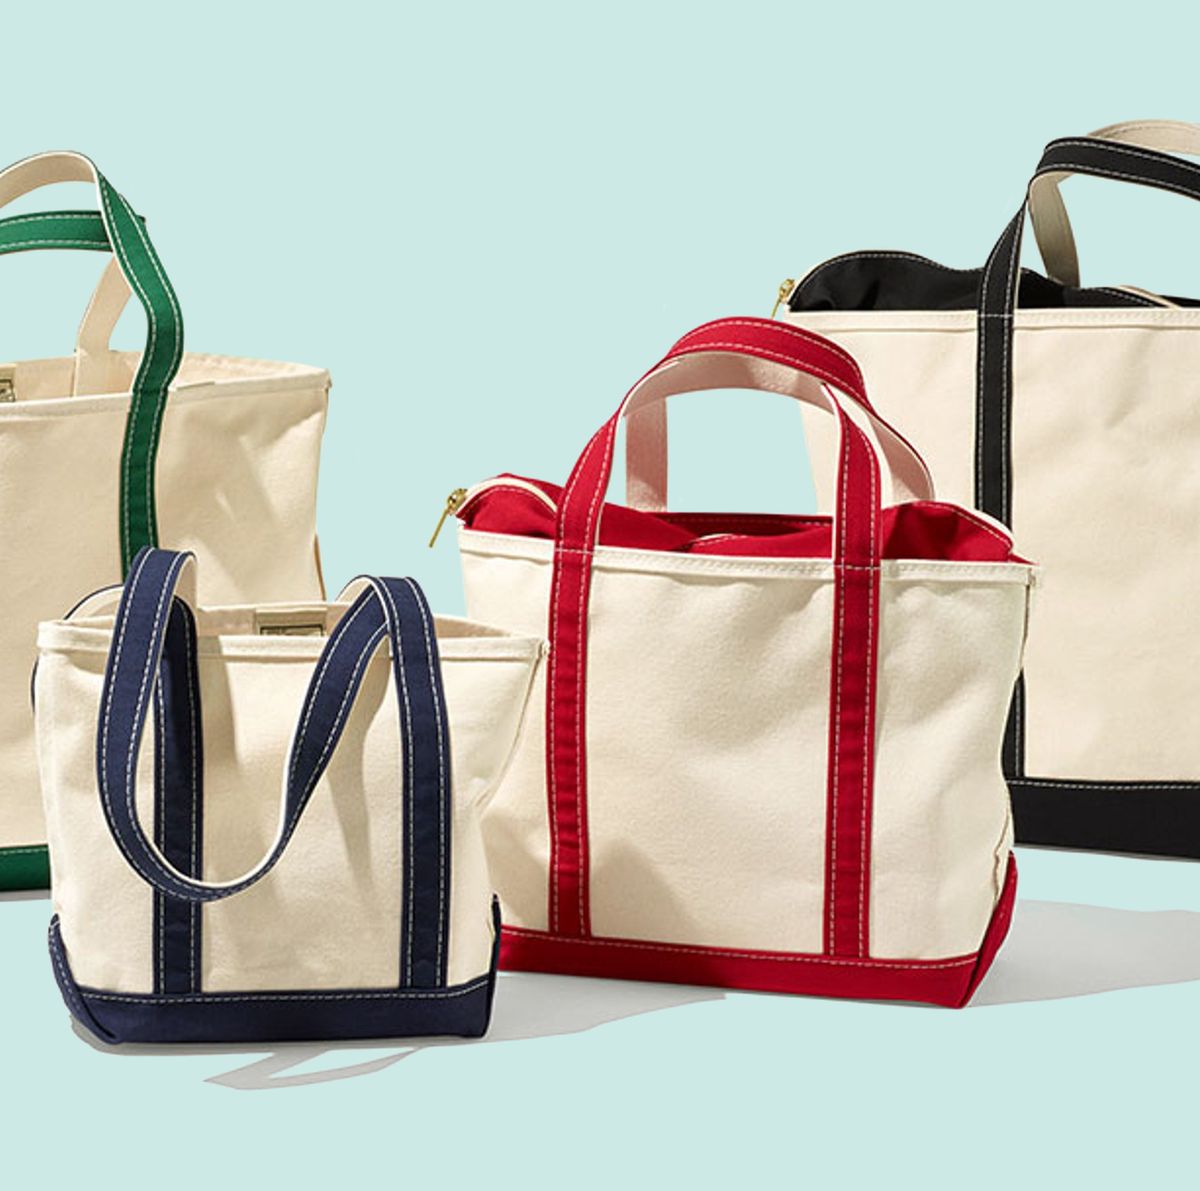 How social media helped L.L. Bean tote bags become a thing - The